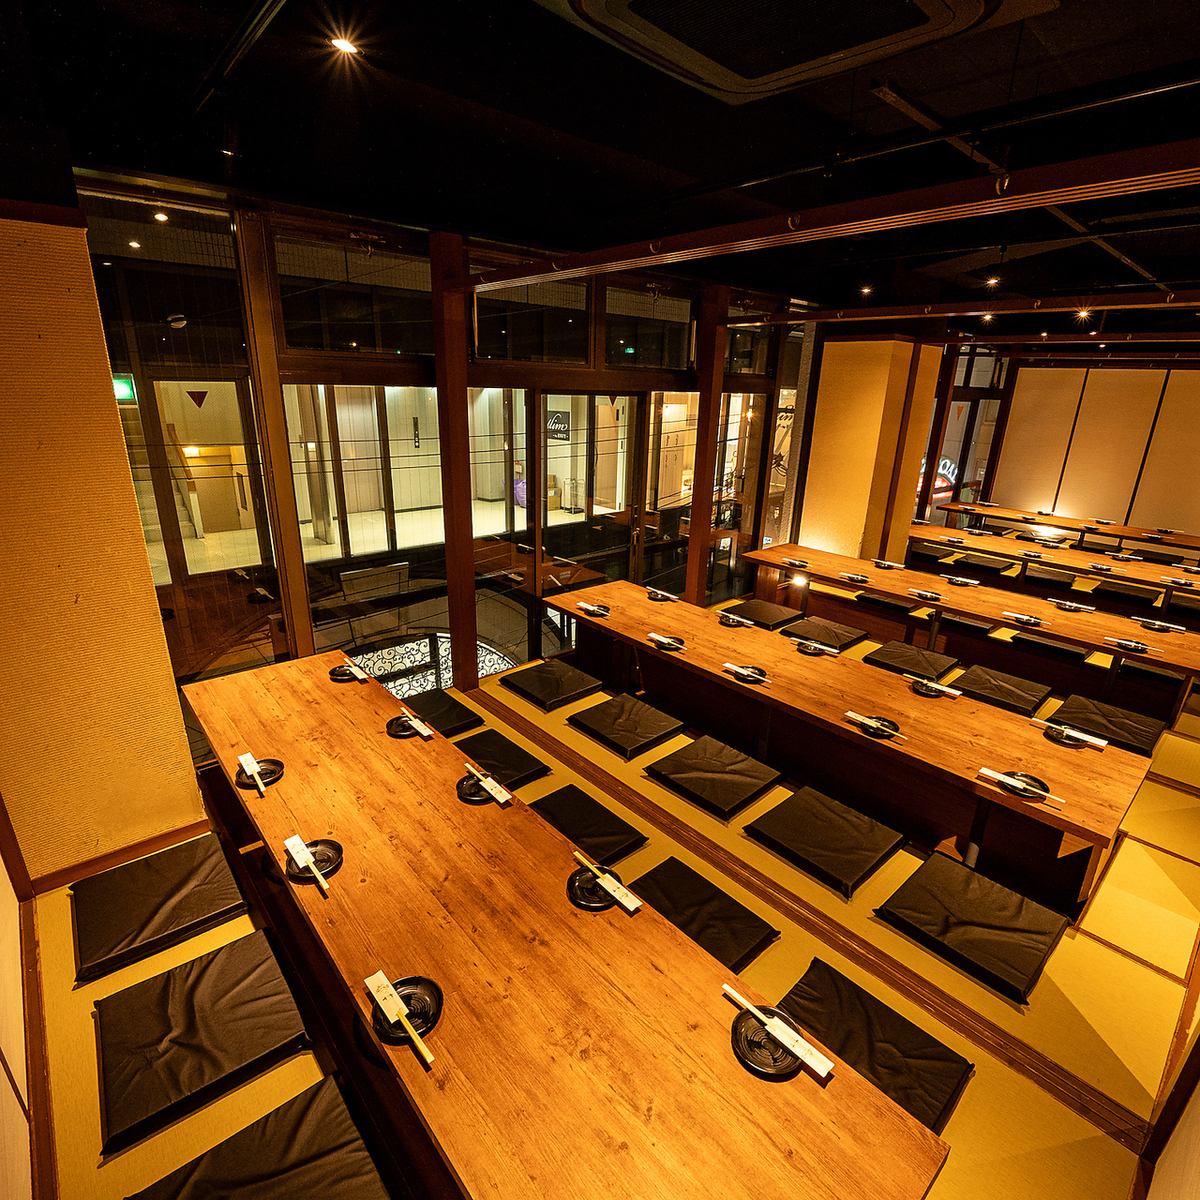 1 minute walk from Sannomiya! A Japanese restaurant with a private room with a night view